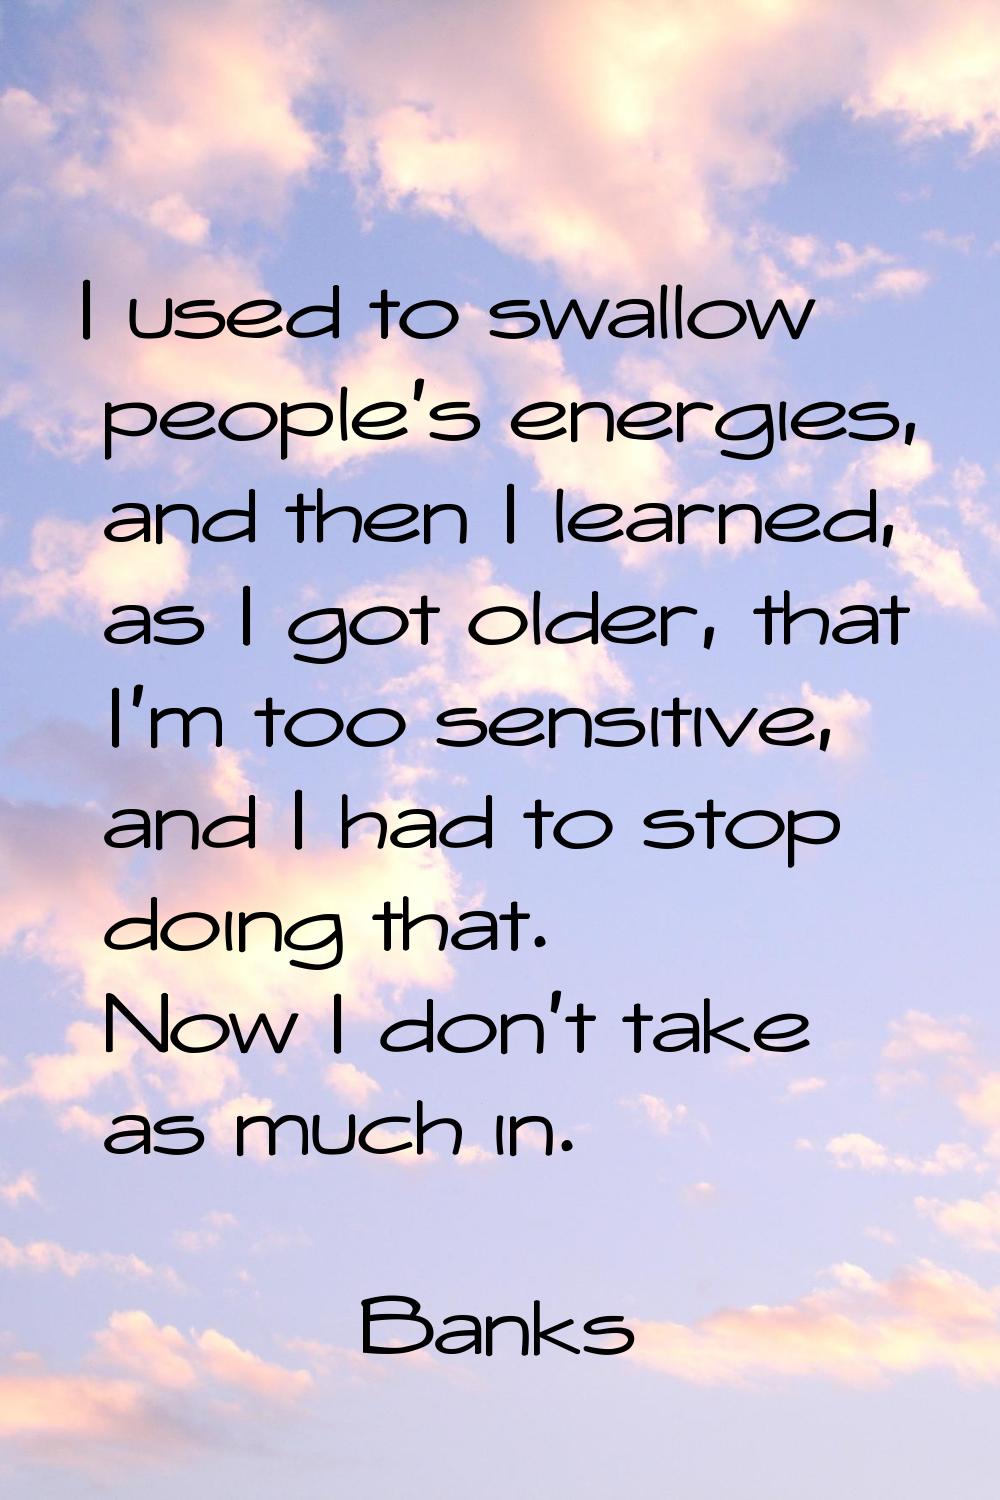 I used to swallow people's energies, and then I learned, as I got older, that I'm too sensitive, an